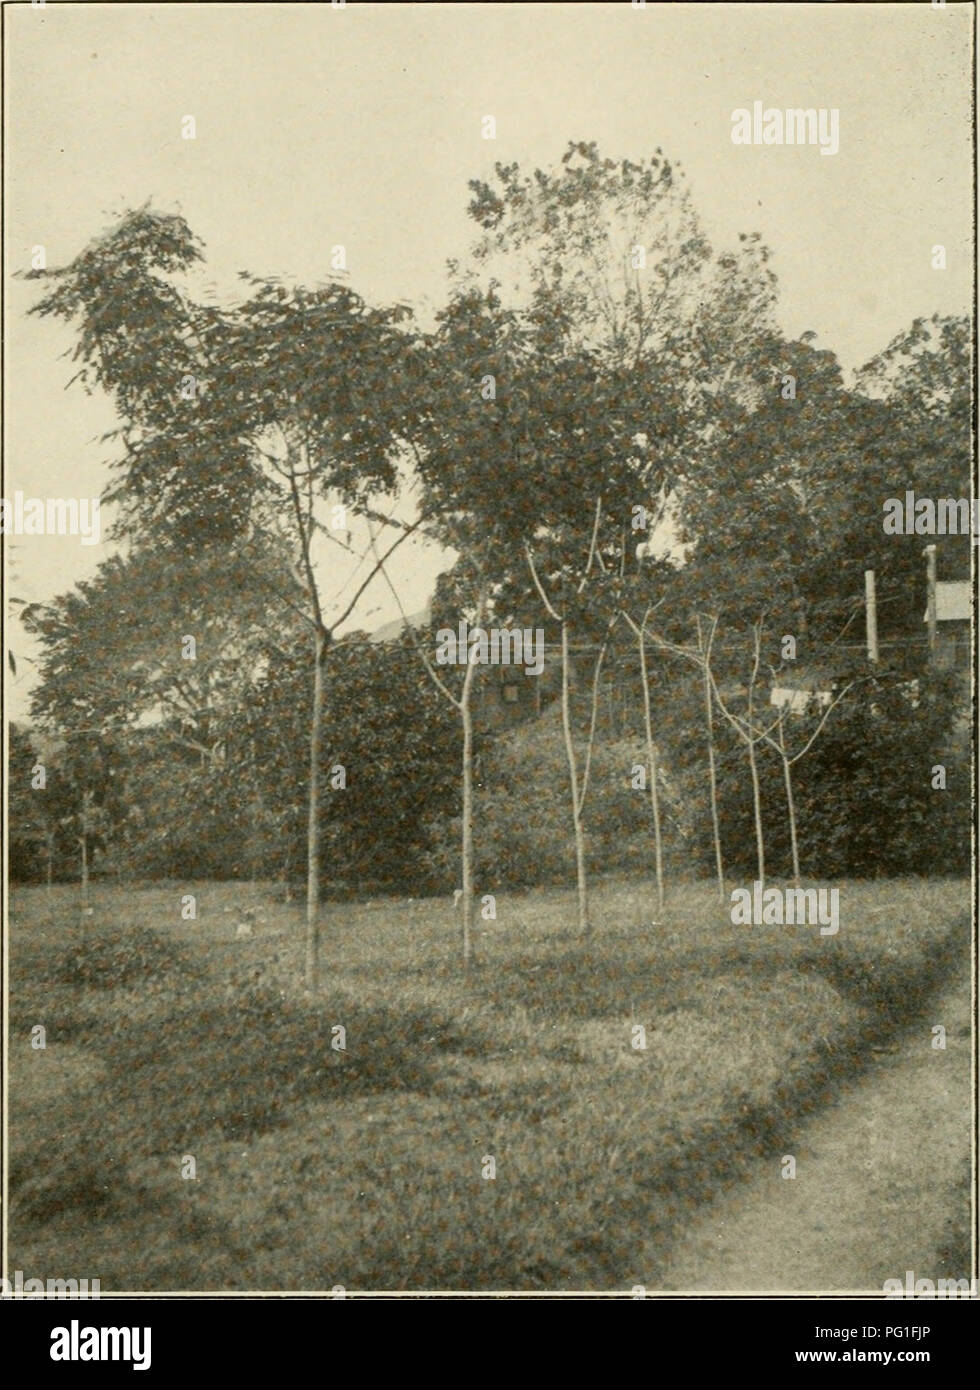 . The Cuba review. 14. THE CUBA REV IE W. Redwood Trees. The Redwood, a Tree of Interest to Tropical America One familiar witli the principal tinil)er and shade trees of tropical America must have observed the increasing popularity of redwood (Adenanthera pavonina) as a shade and ornamental tree along the streets and in the parks of cities and towns in the West Indies. The tree is a native of the tropical East and is found most abundantly in Bengal, South India, Burma, Molucca, and North Queensland. Its botanical distribution has, however, been greatly extended by planting, and it is now growi Stock Photo